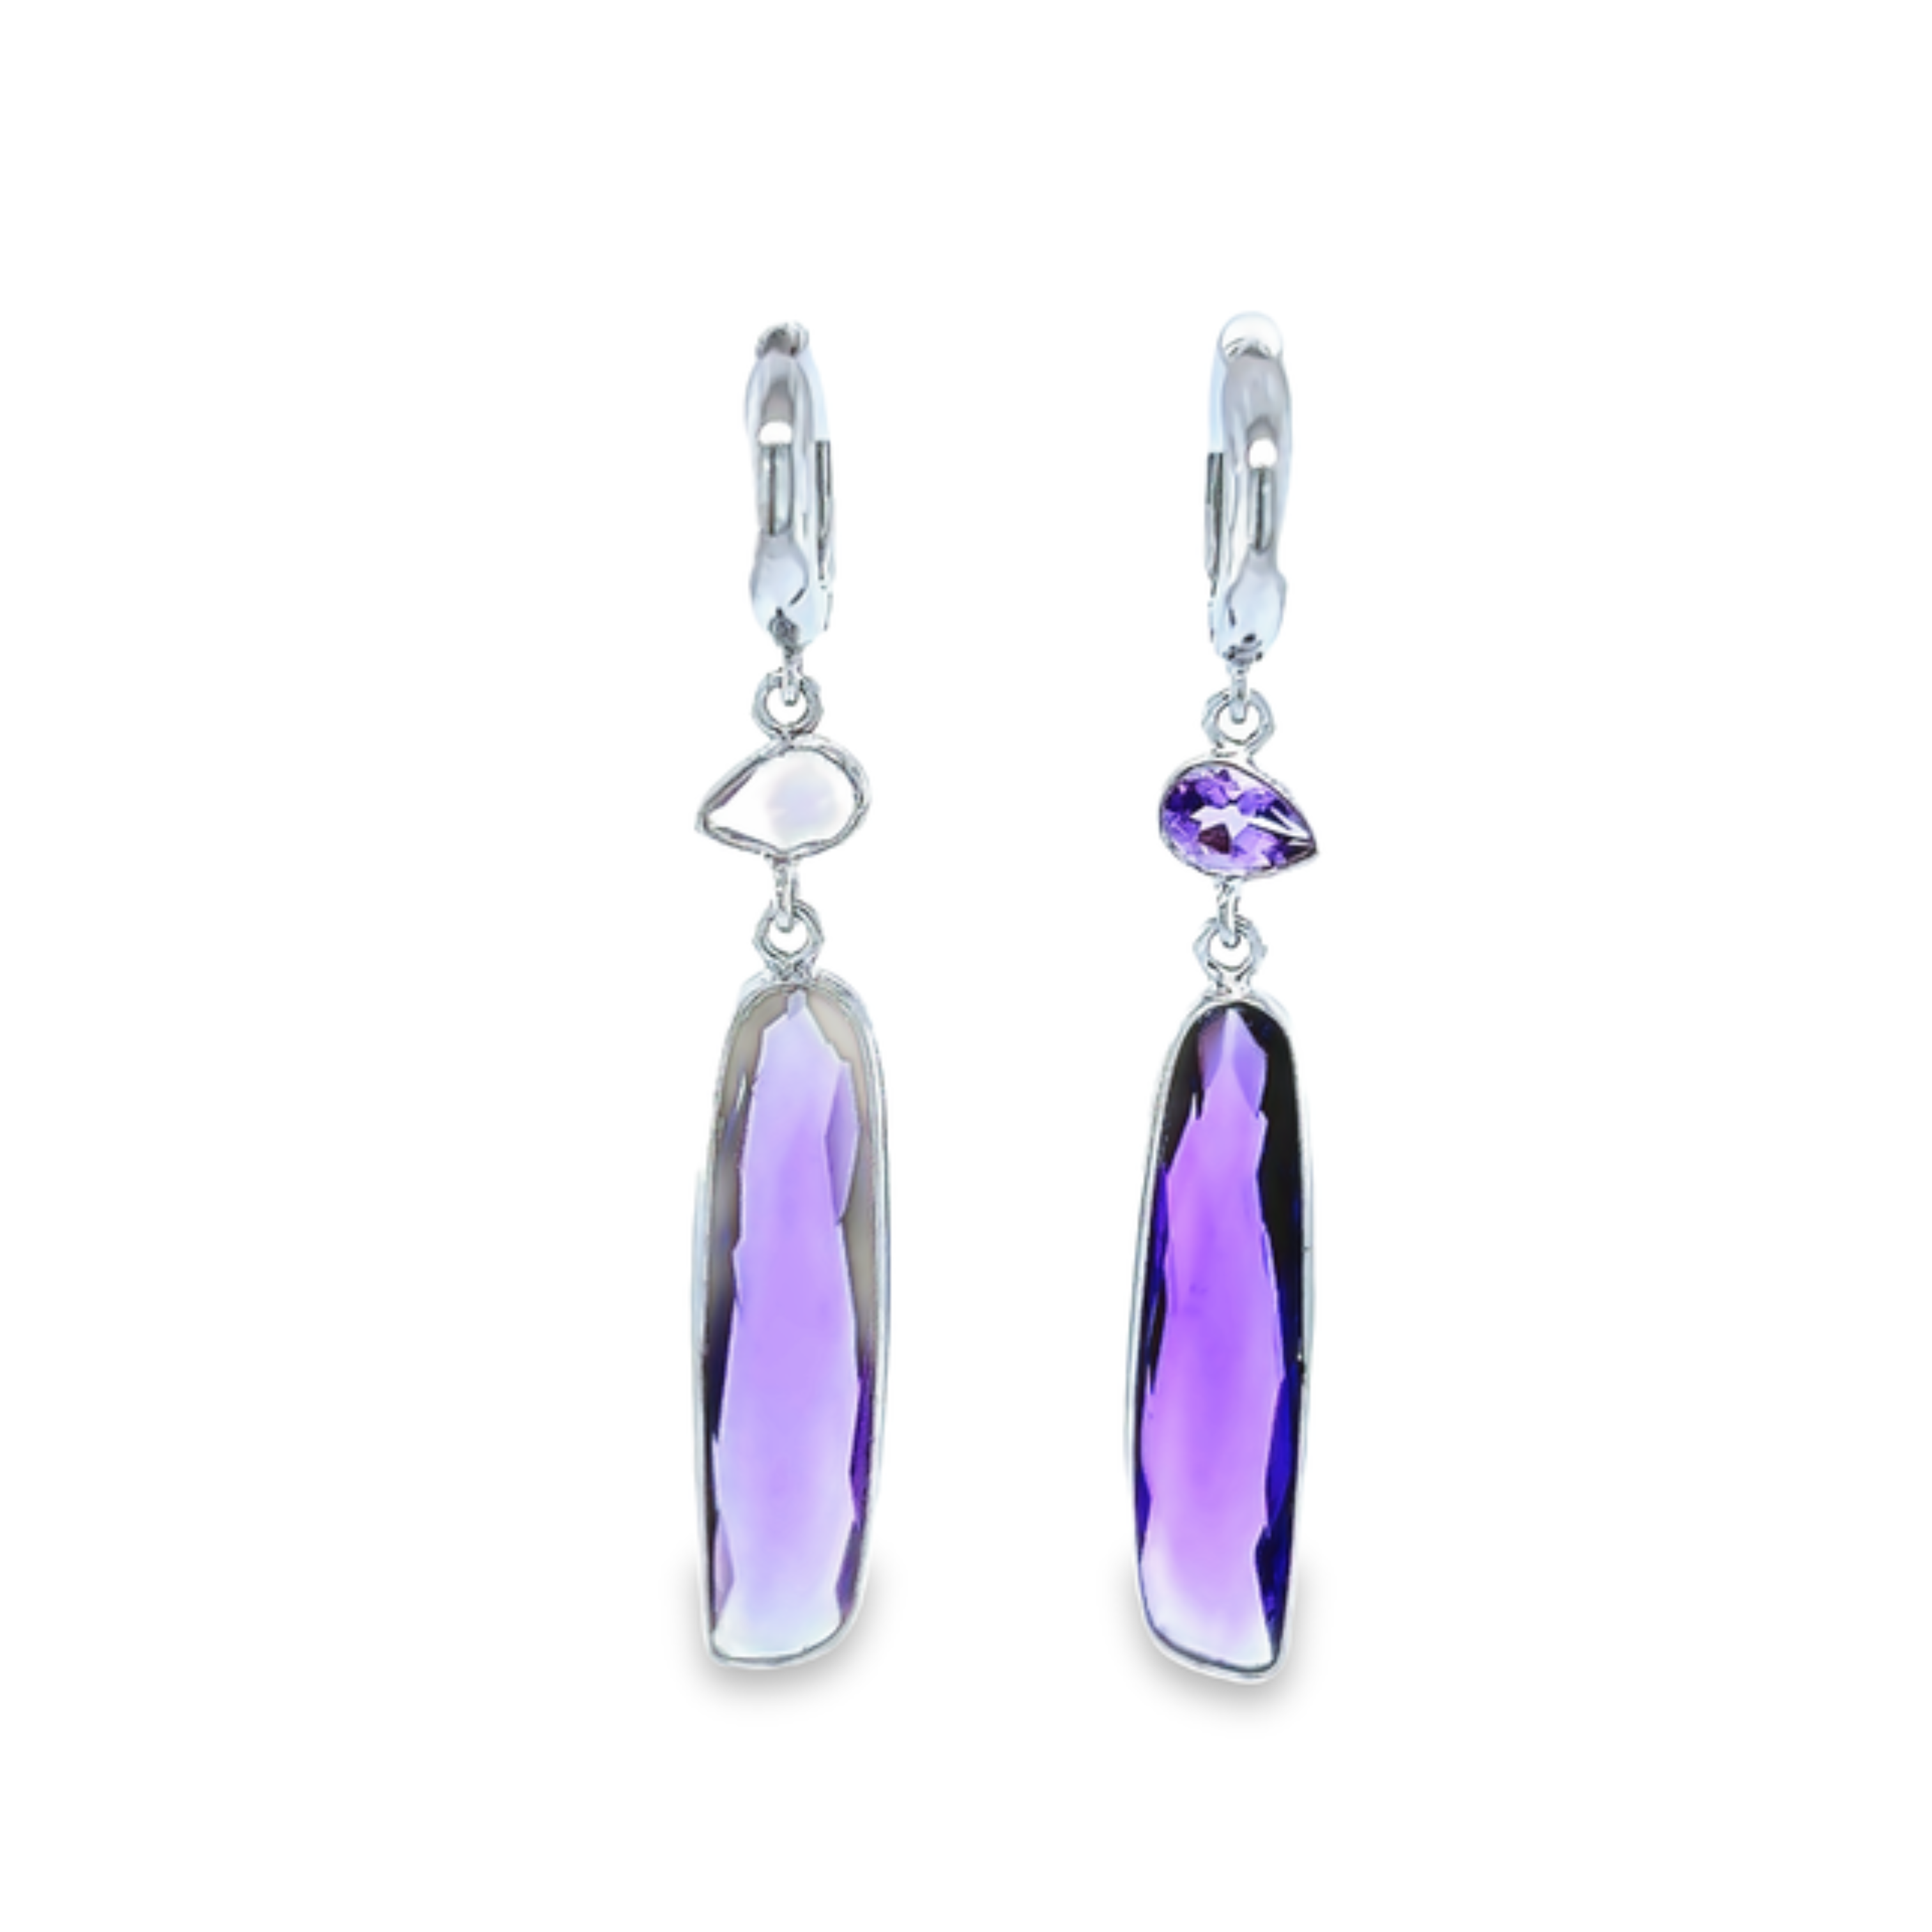 Rhodium plated sterling dangle earrings with 4 Amethysts